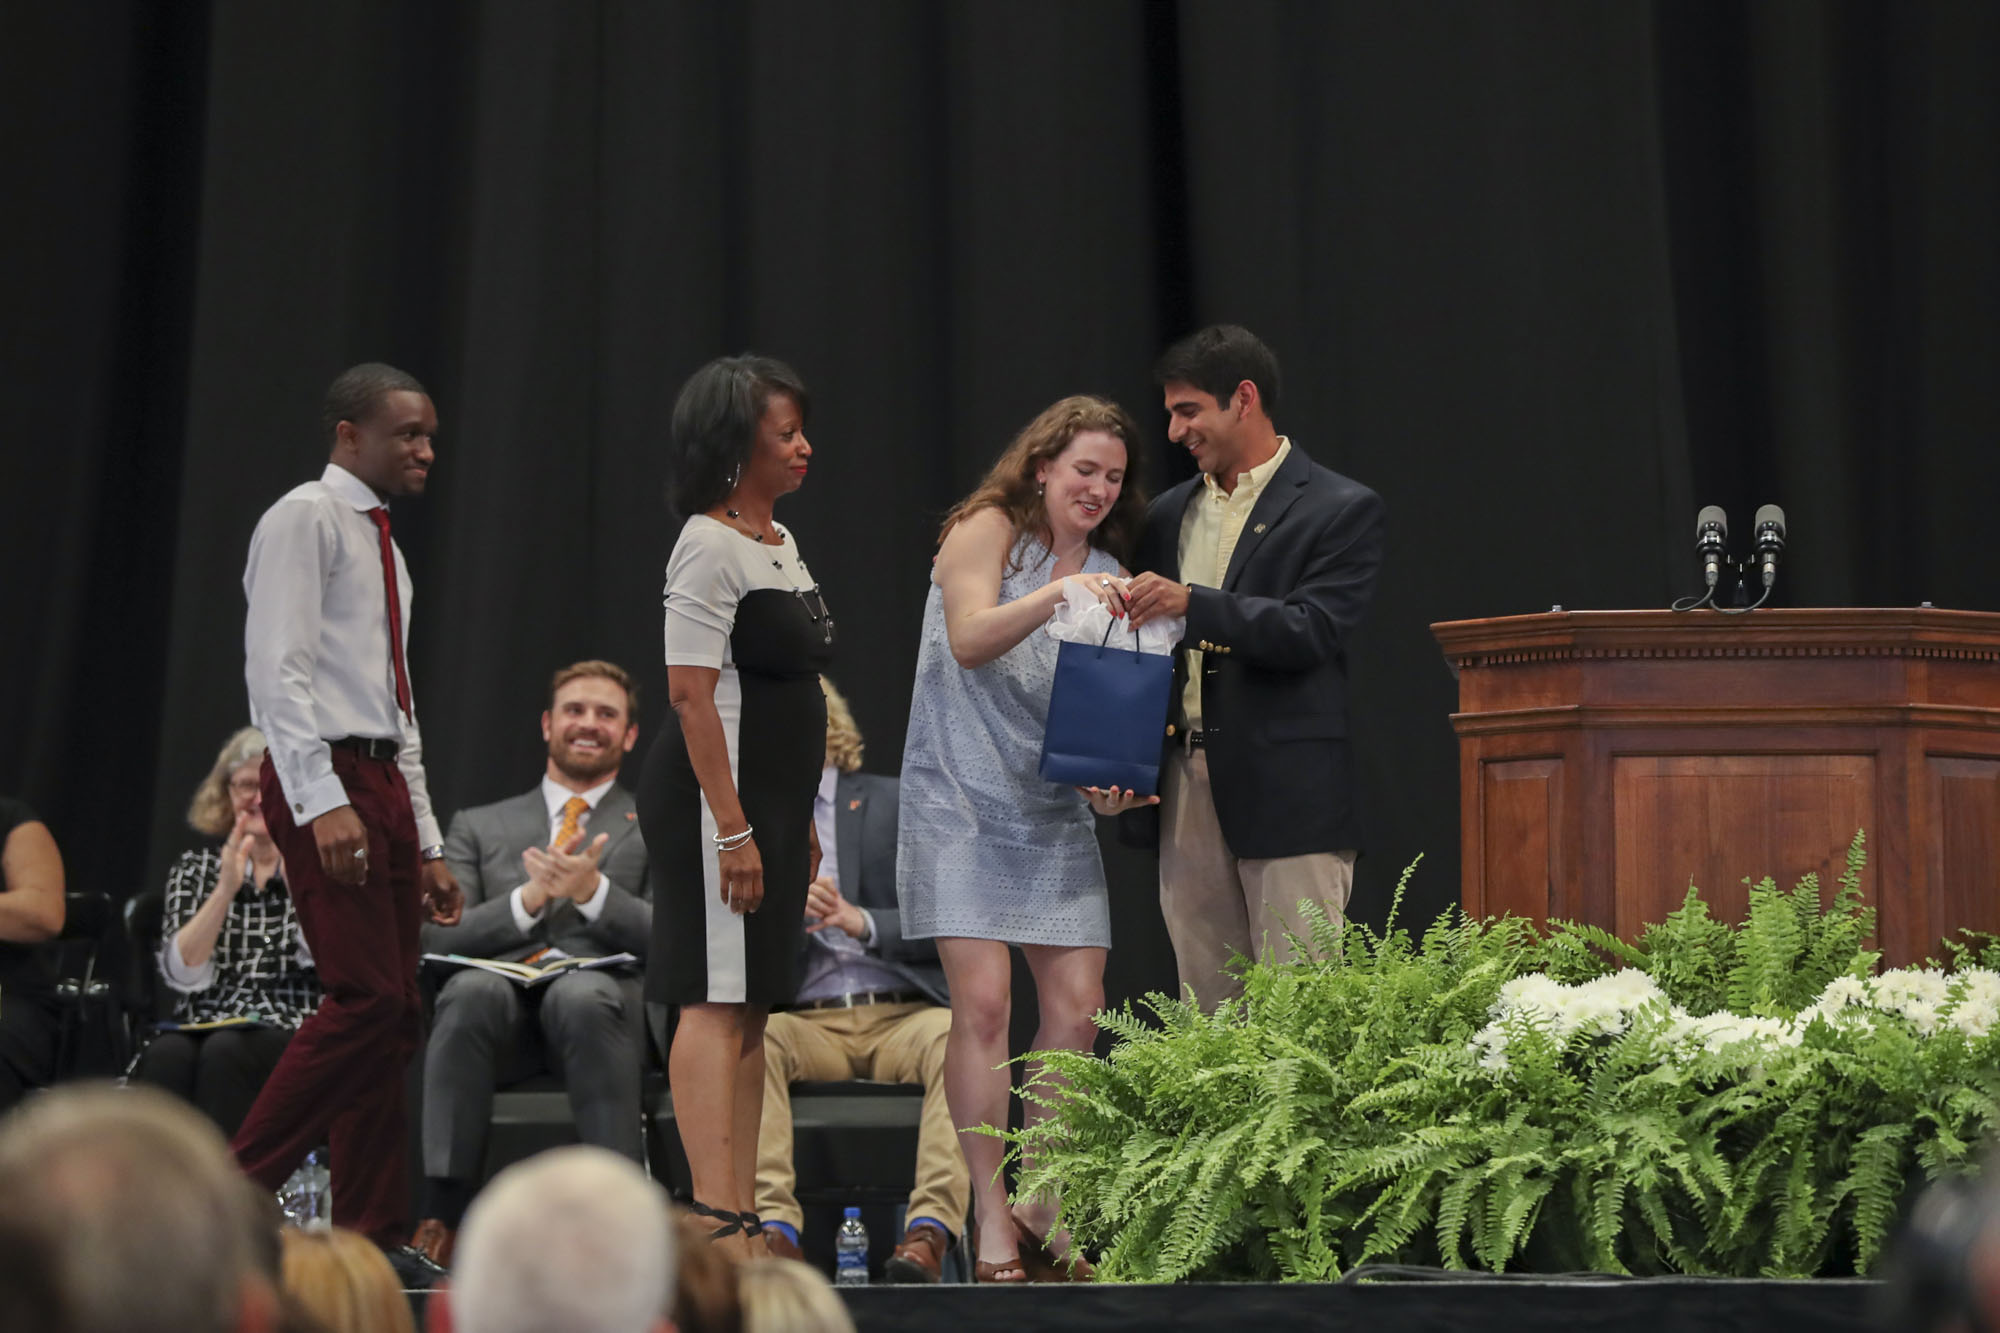 Rohan Kumar, right, Tyler Ambrose, Maeve Curtin, and Tabitha Enoch stand on stage together